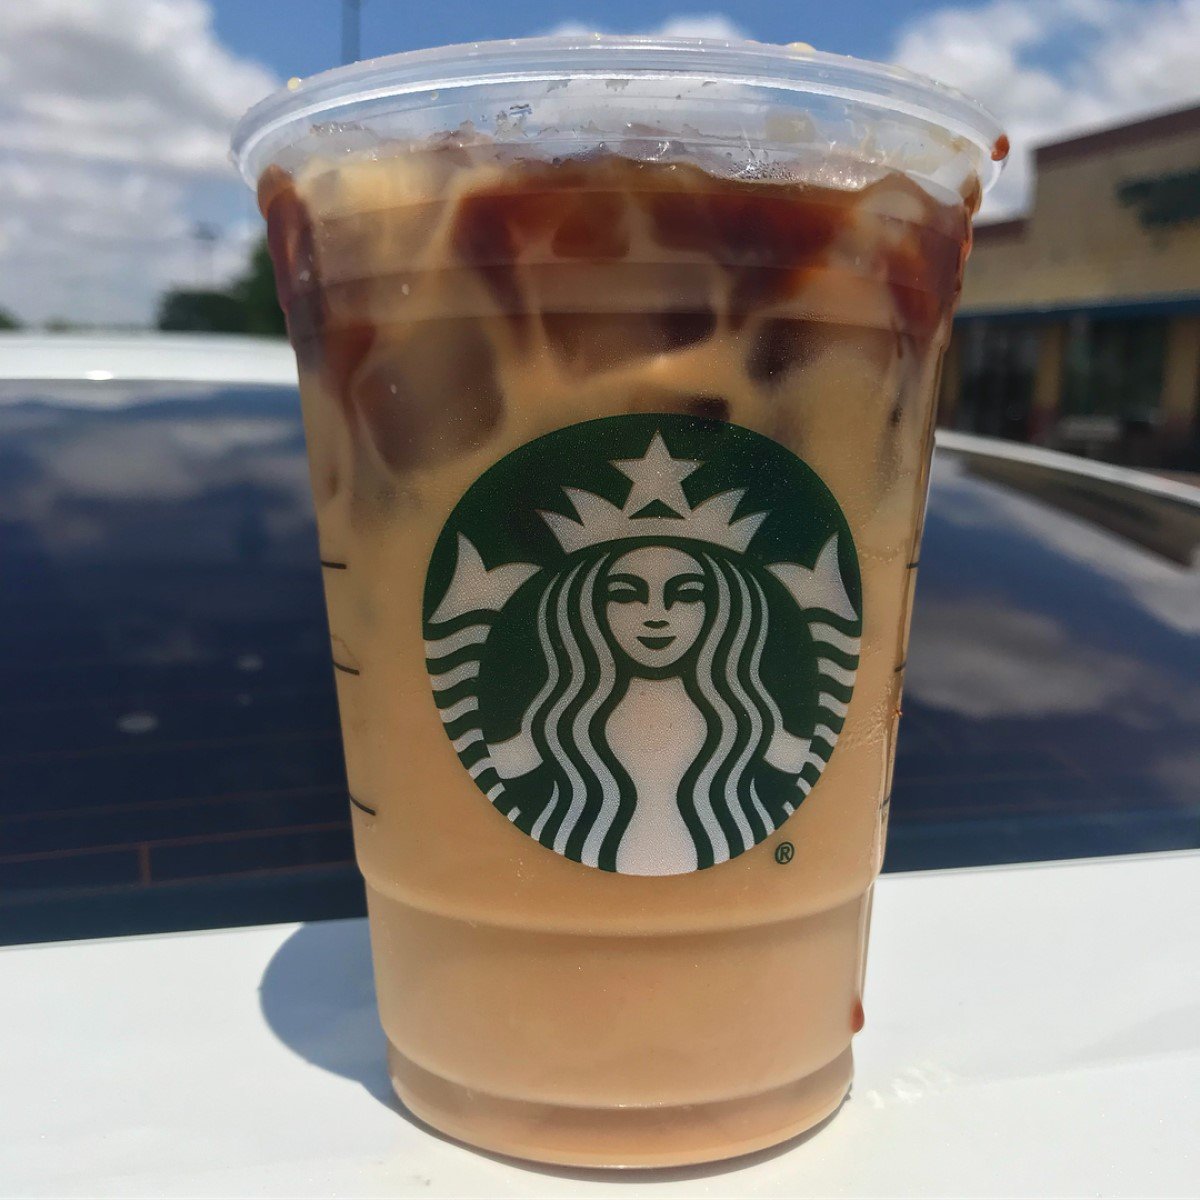 cup of starbucks iced dirty chai tea latte on white surface with car in background